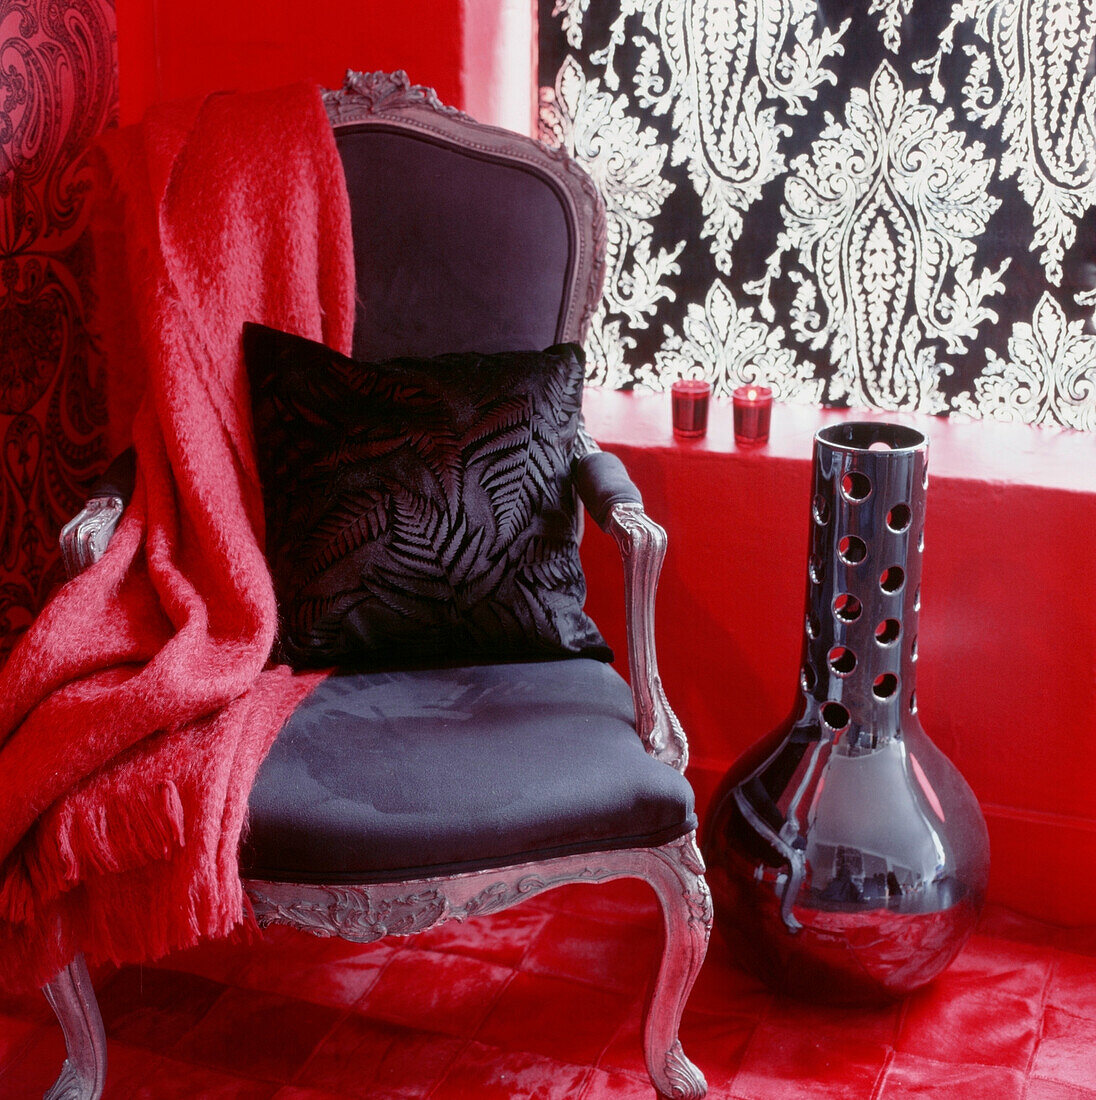 Detail of a red and black living room corner